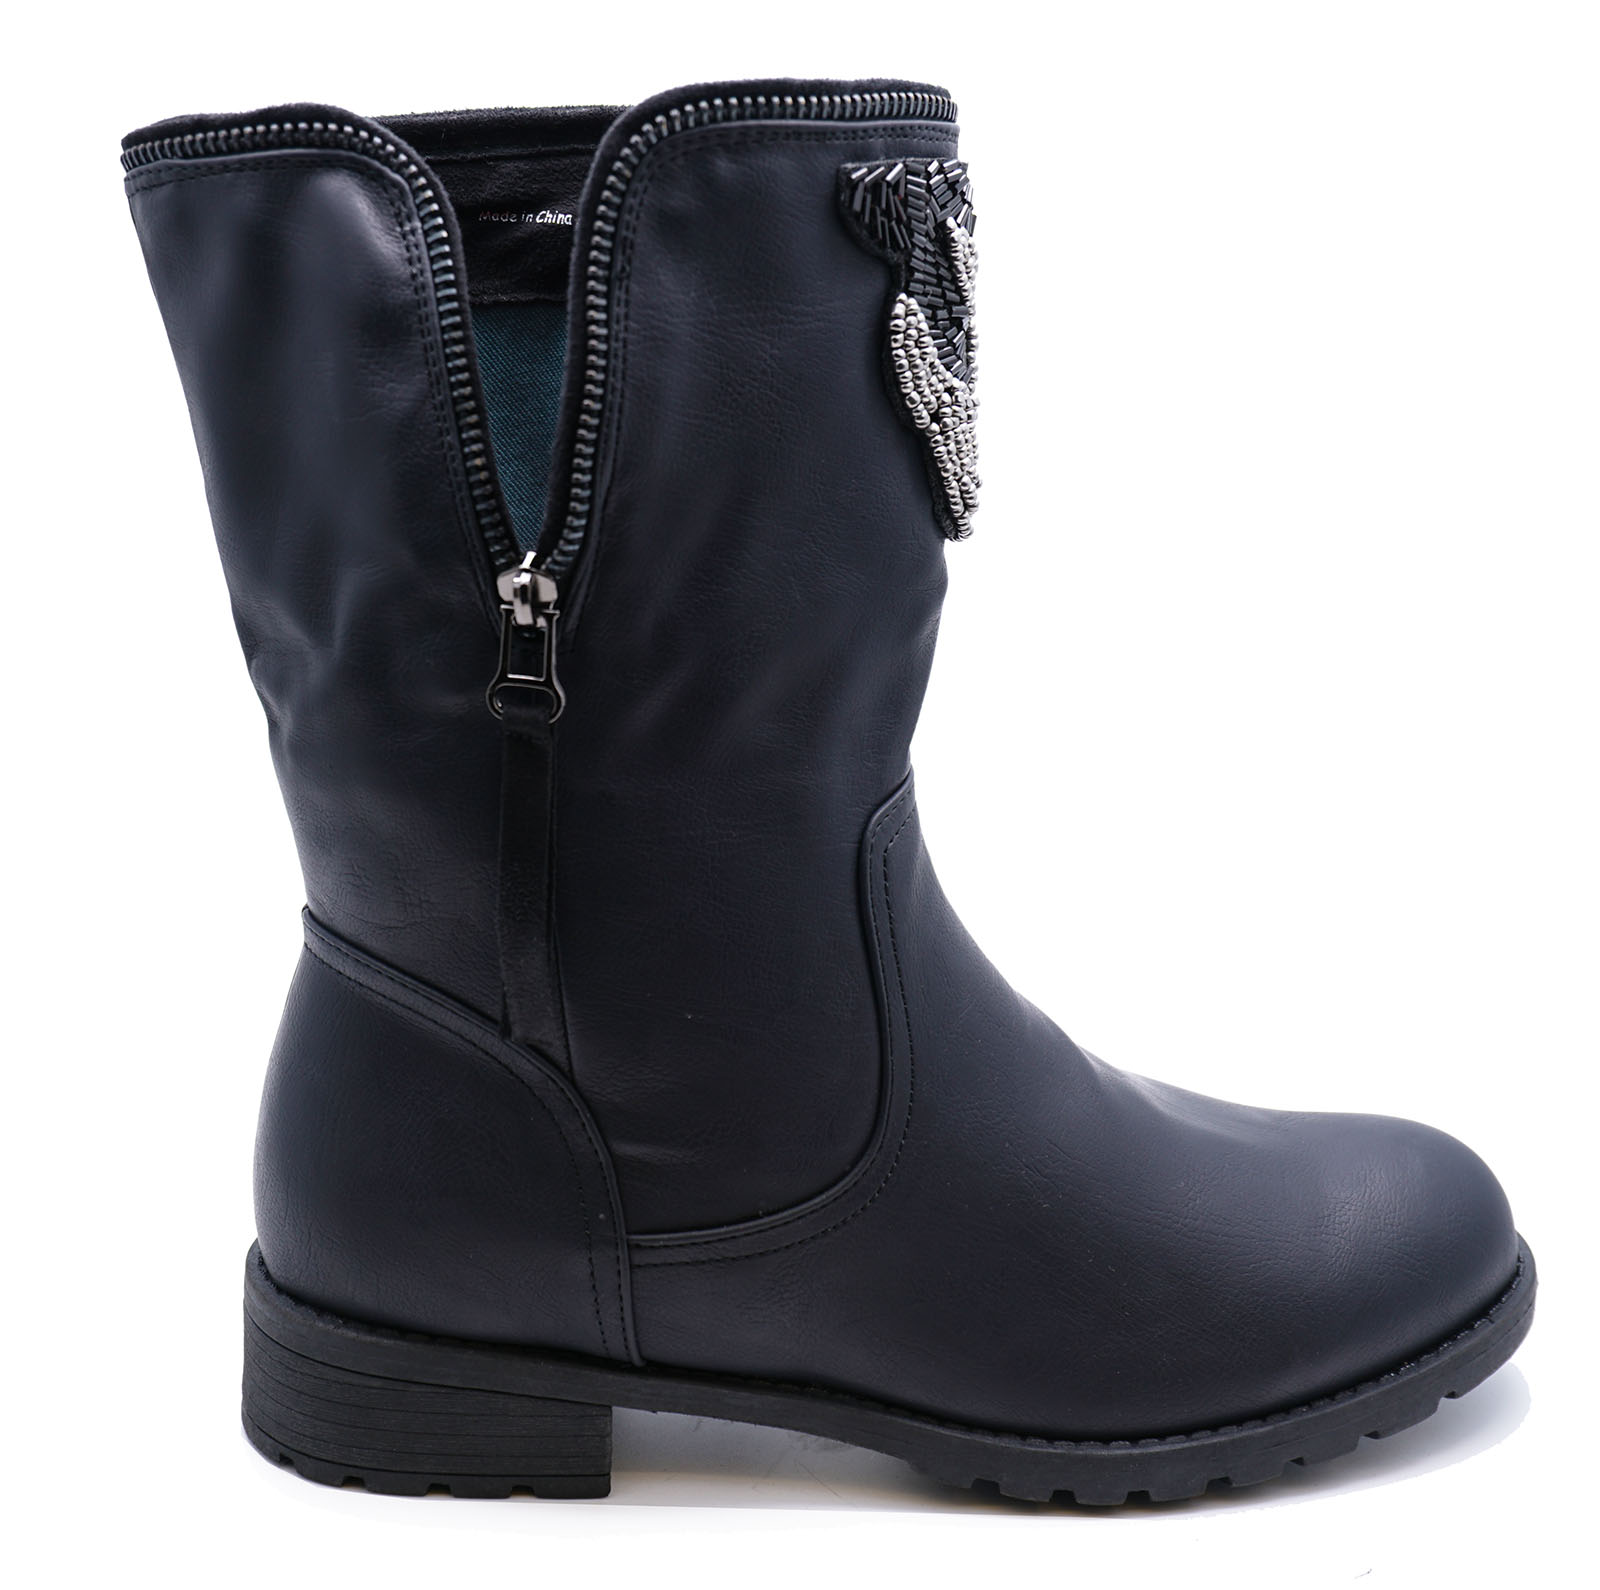 LADIES BLACK SLOUCH ANKLE BIKER FLAT COMFY CASUAL ROCK-CHICK BOOTS ...